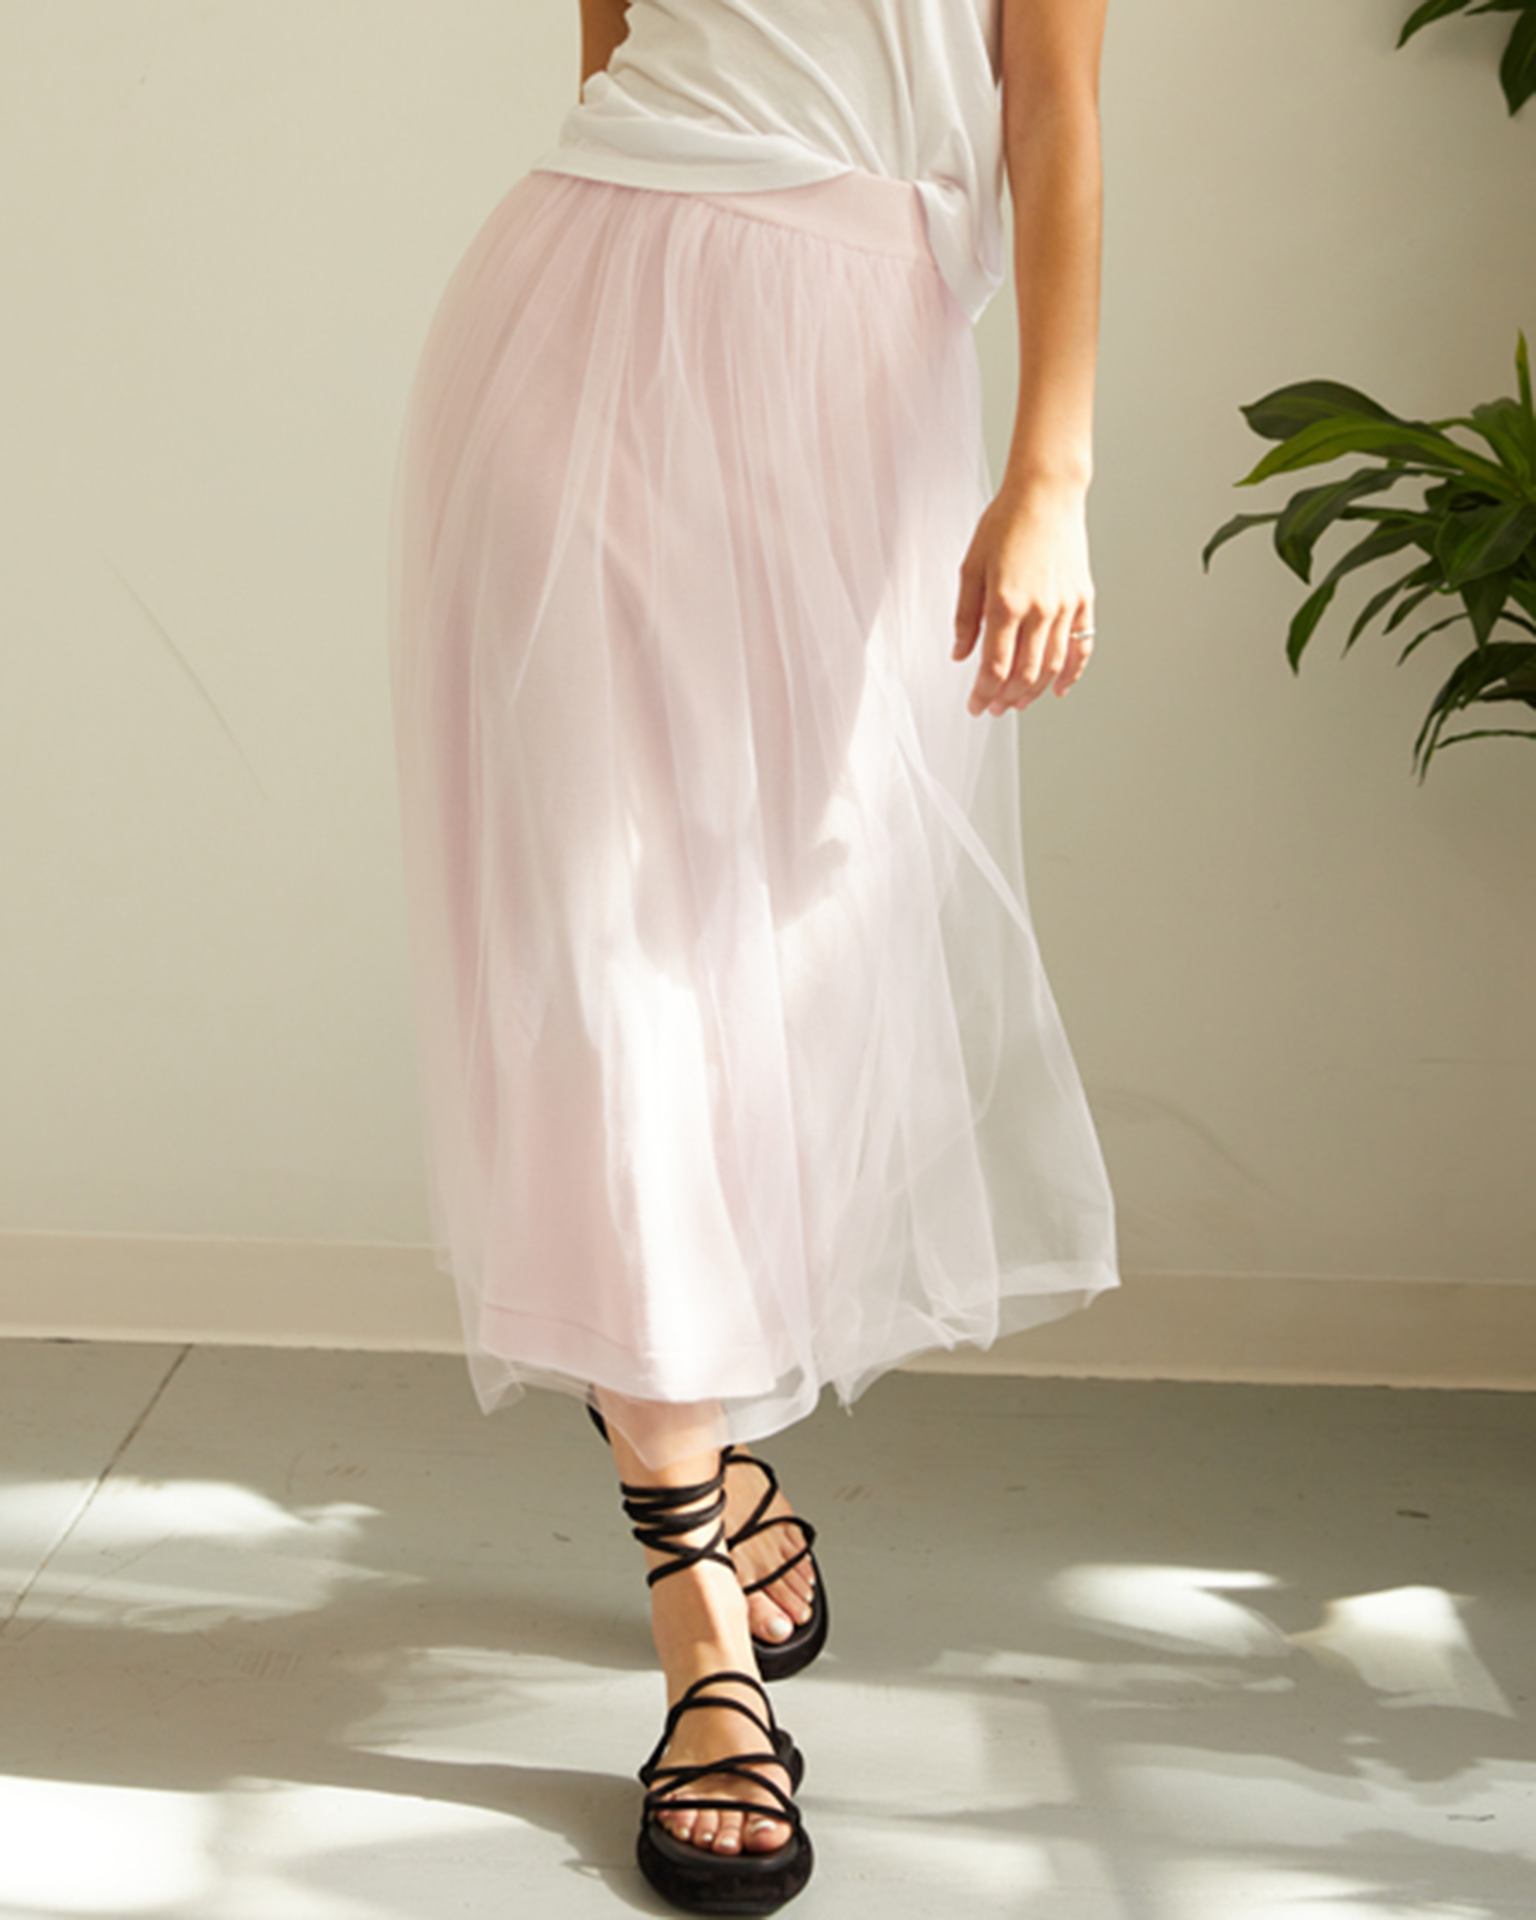 Autumn Cashmere Gathered Skirt w/ Tulle in Powder Pink - Bliss